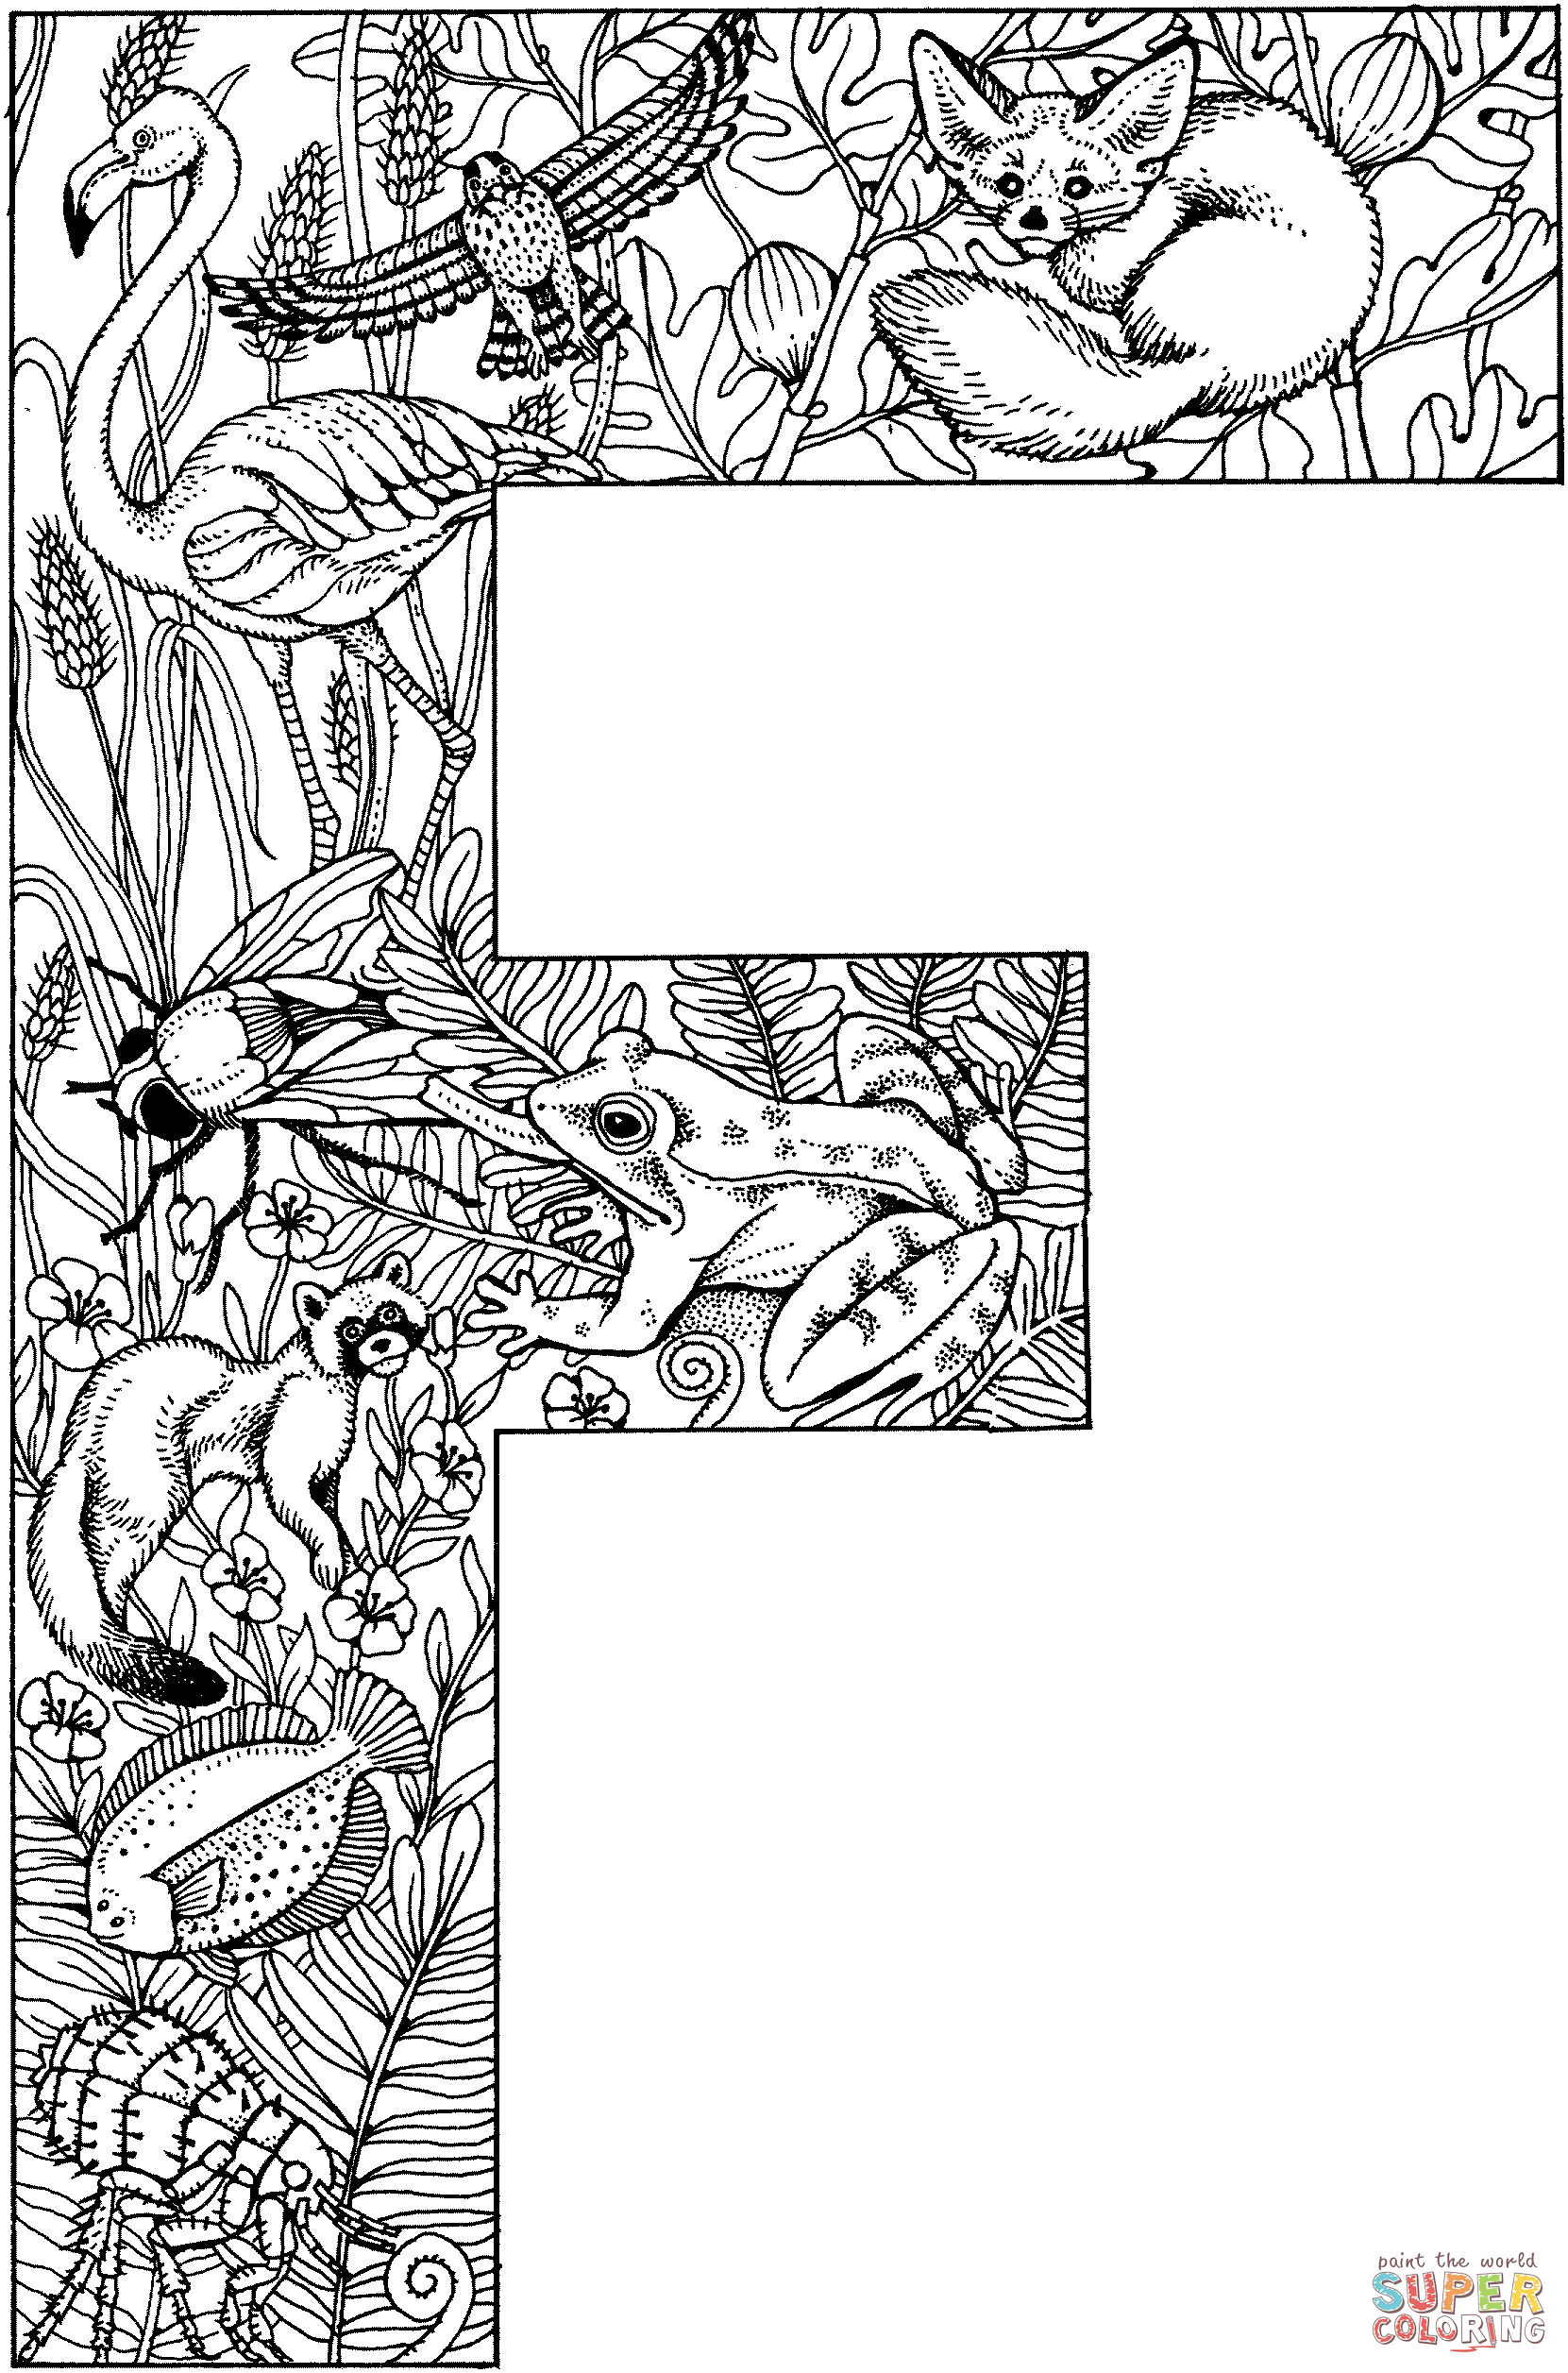 Letter F coloring page | Free Printable Coloring Pages